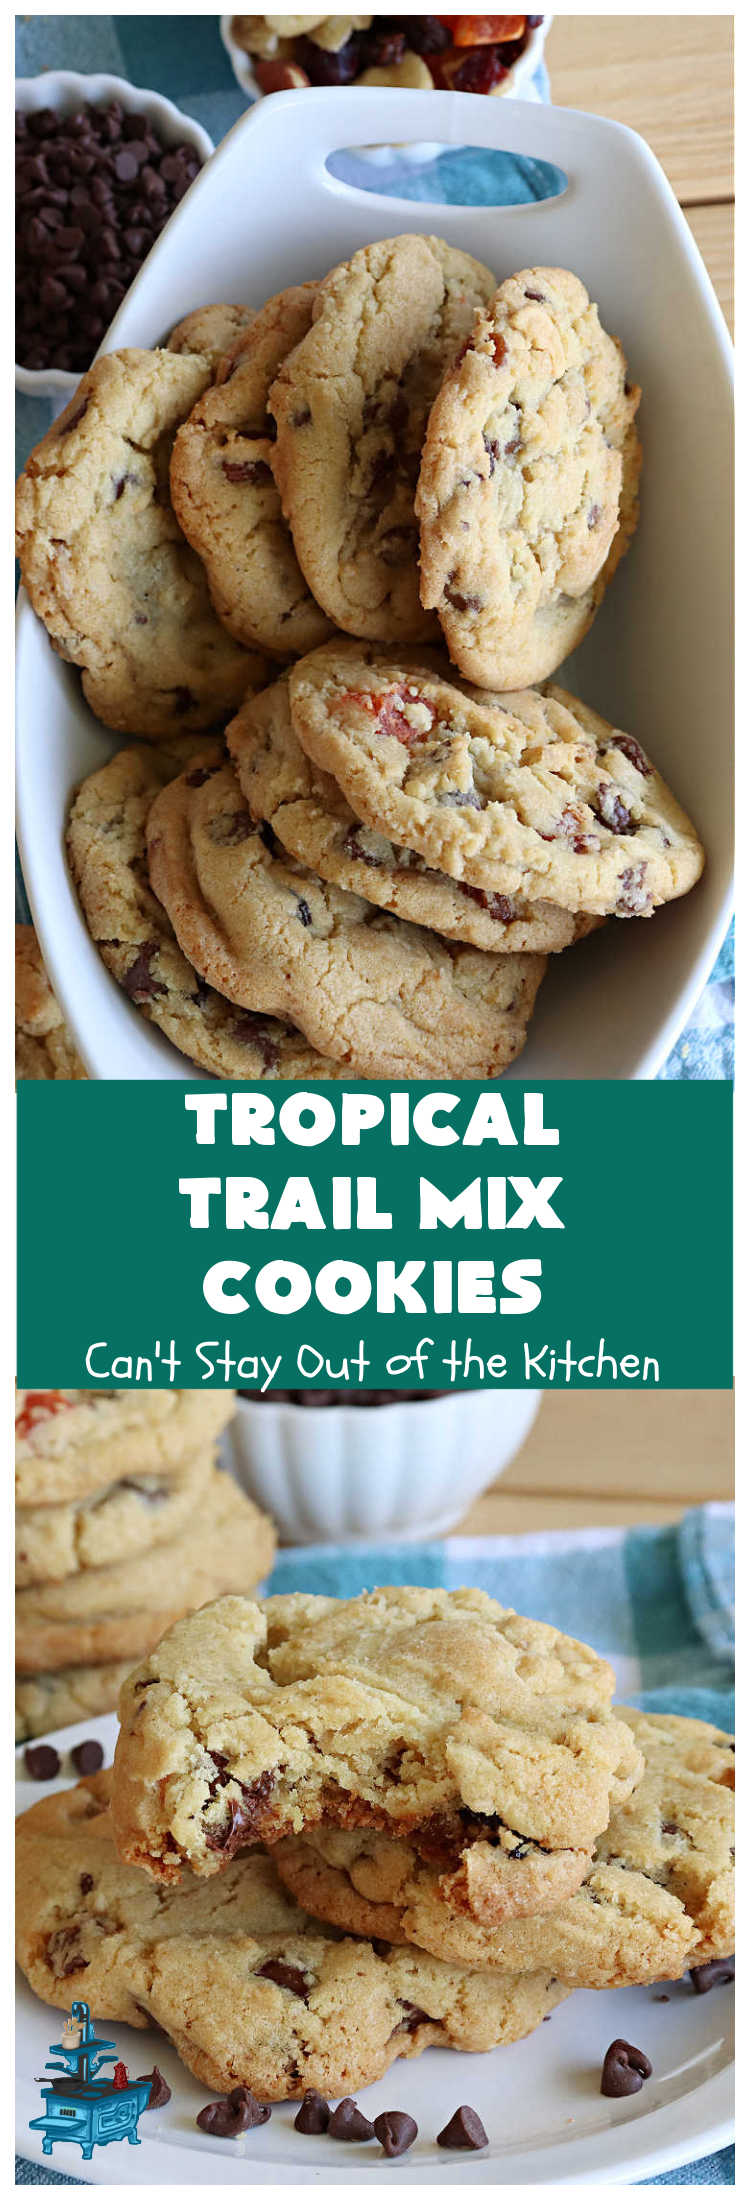 Tropical Trail Mix Cookies | Can't Stay Out of the Kitchen